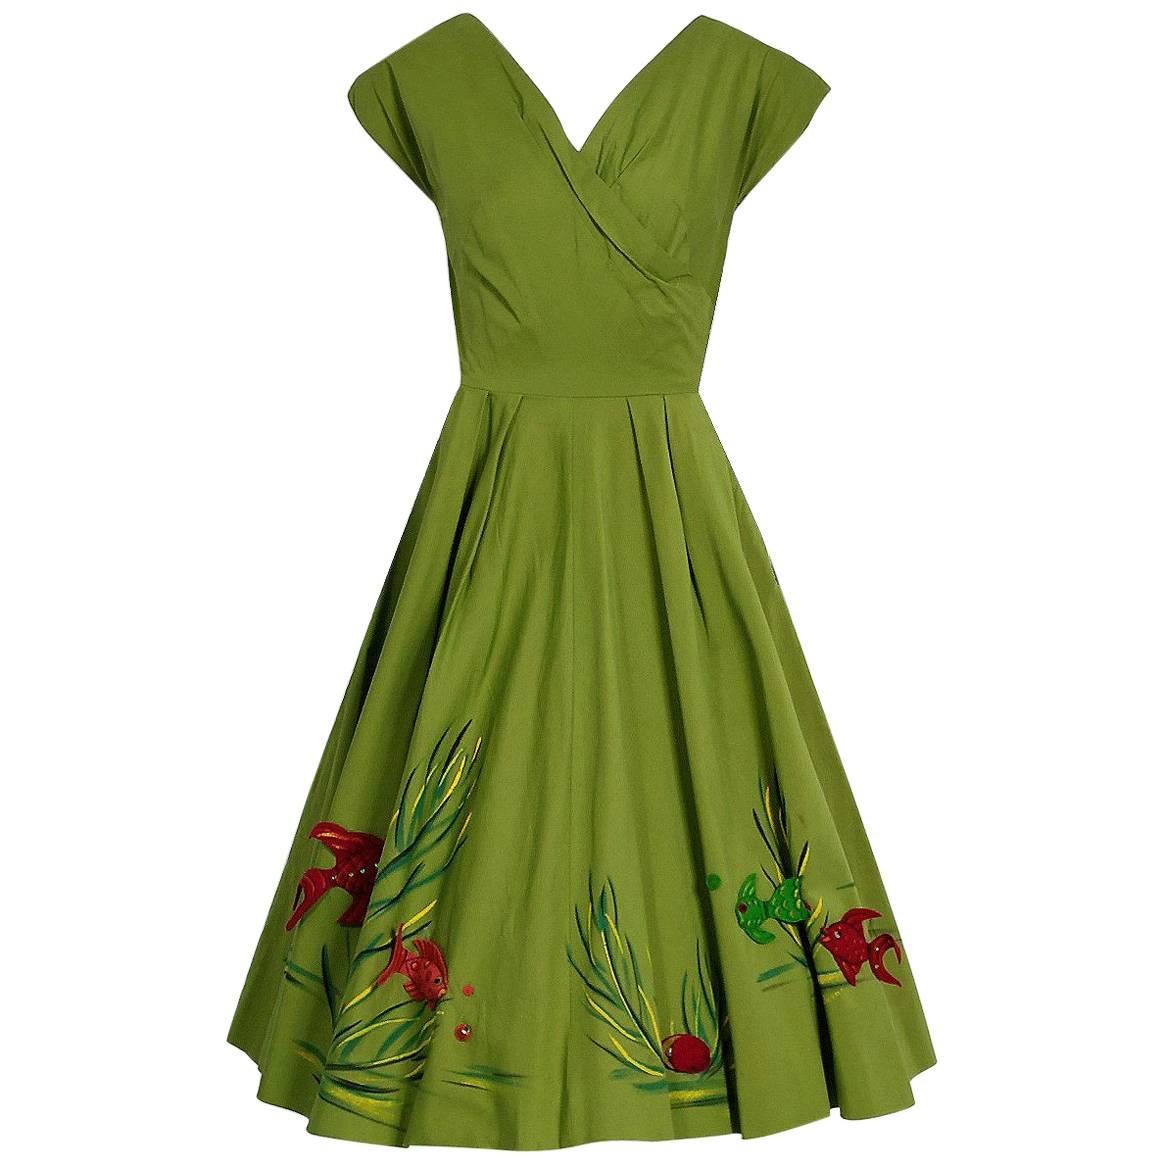 1950's Under-The-Sea Novelty Handpainted Applique Olive Green Cotton Sun Dress 